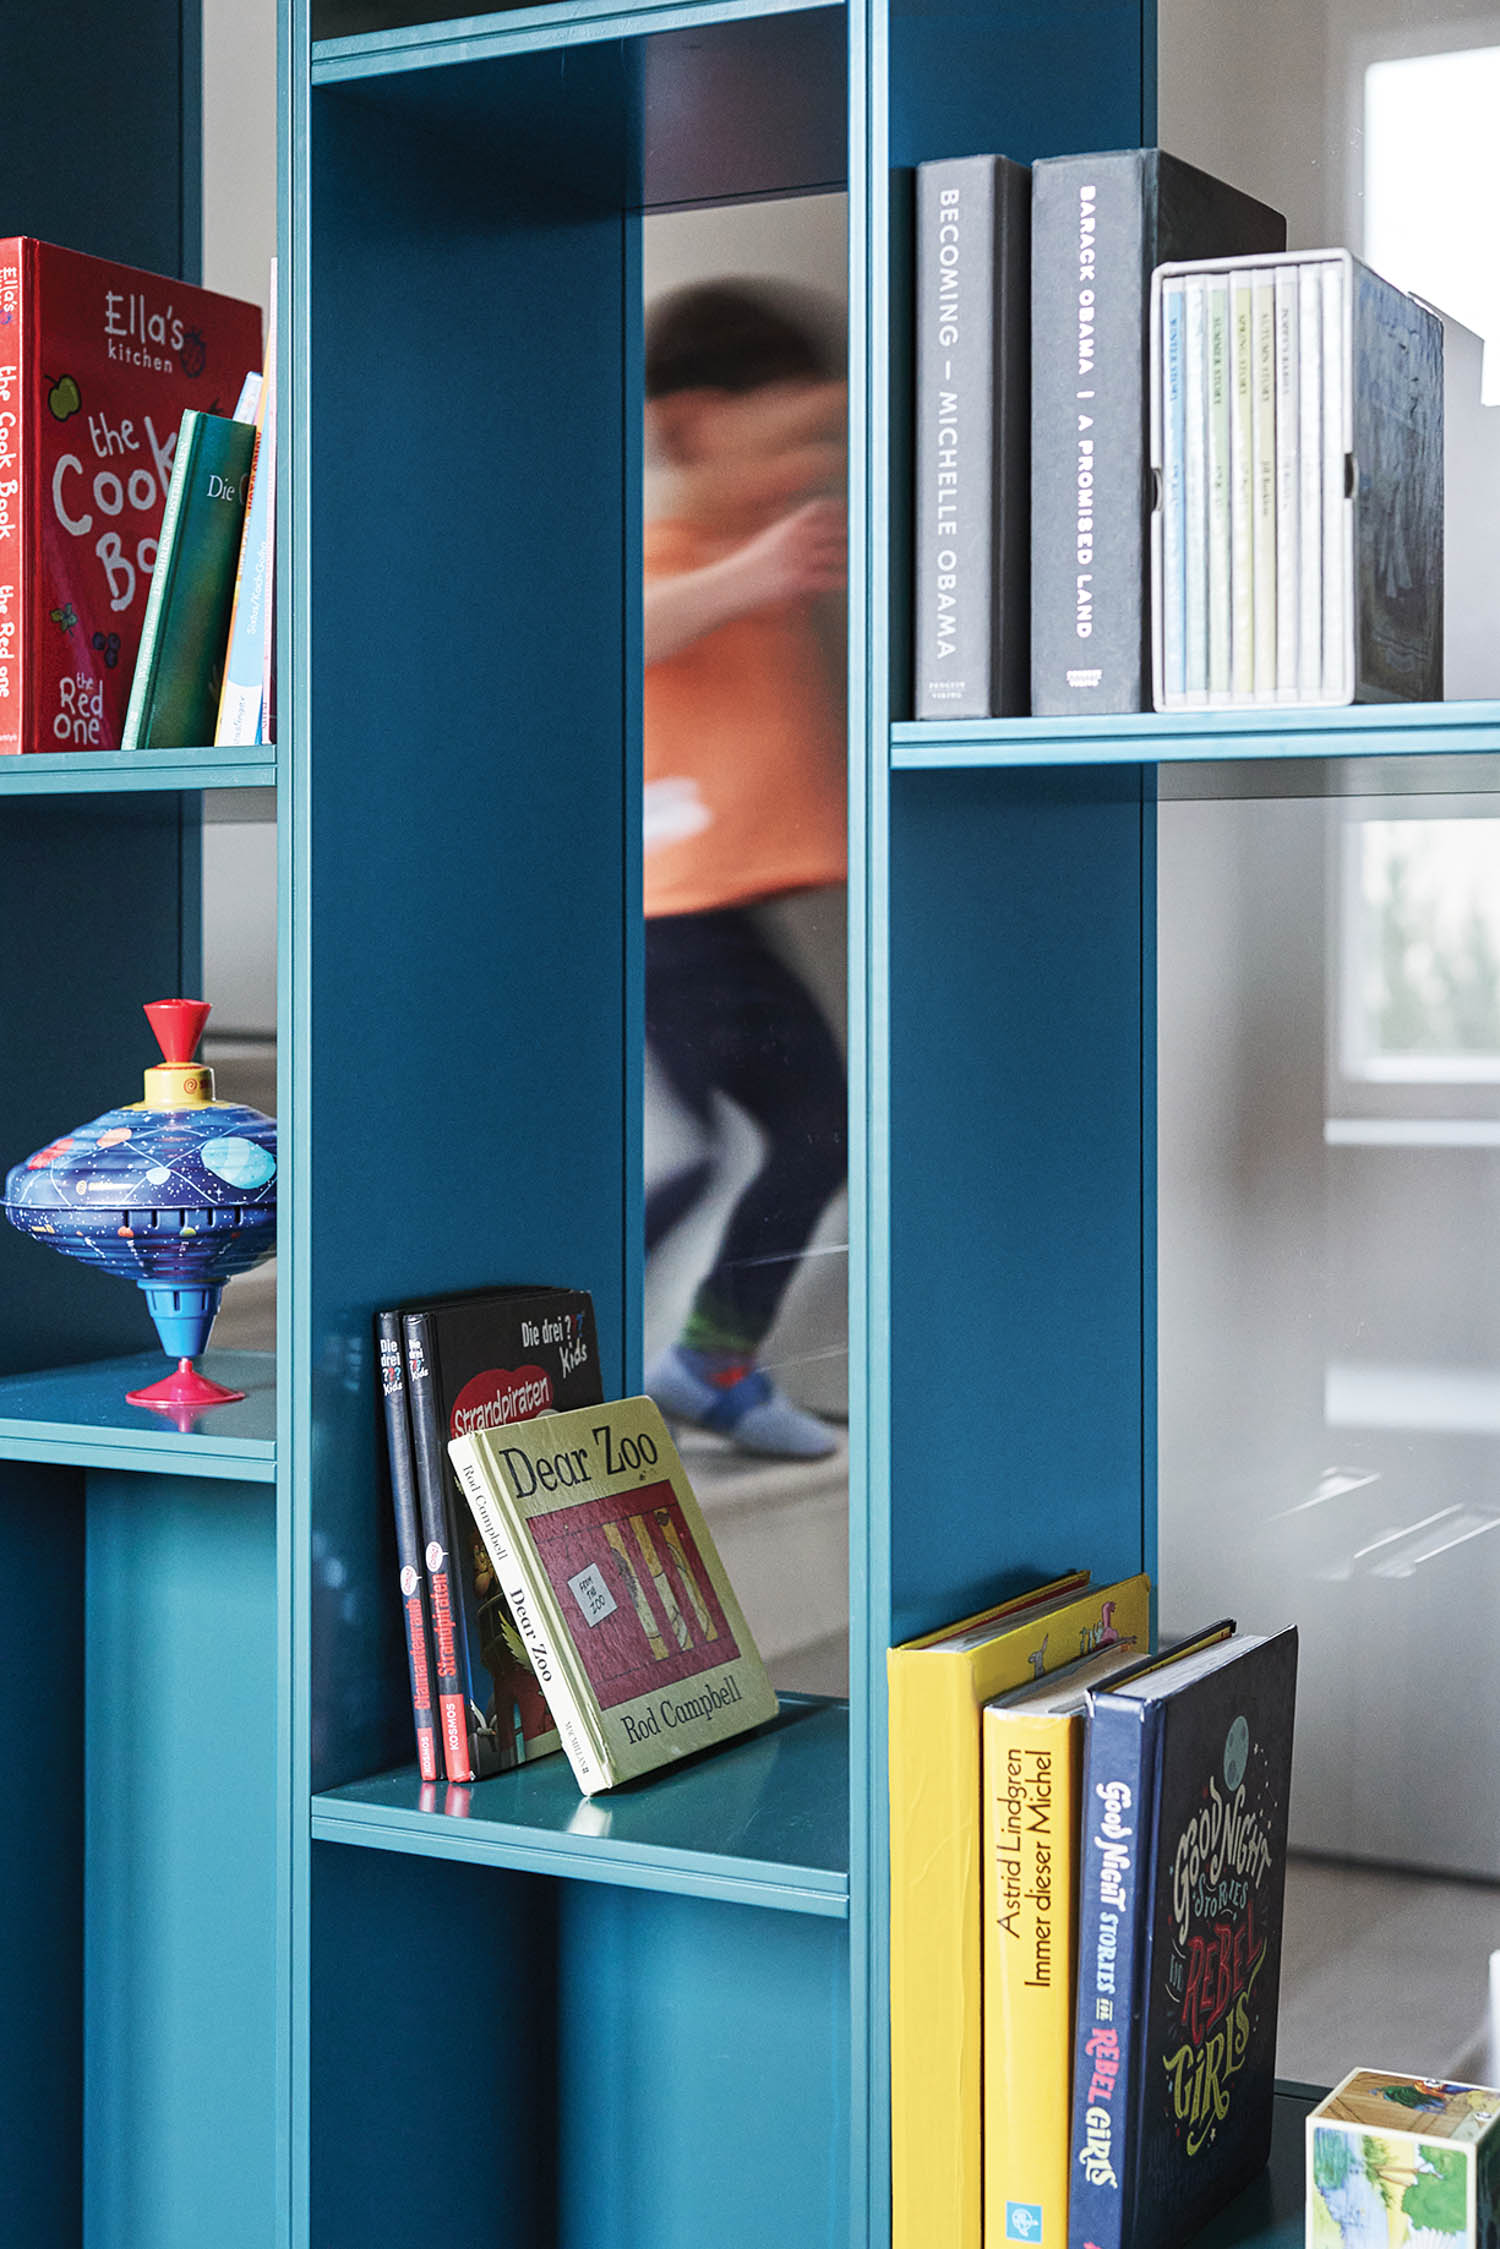 blue shelving with children's books and toys in it